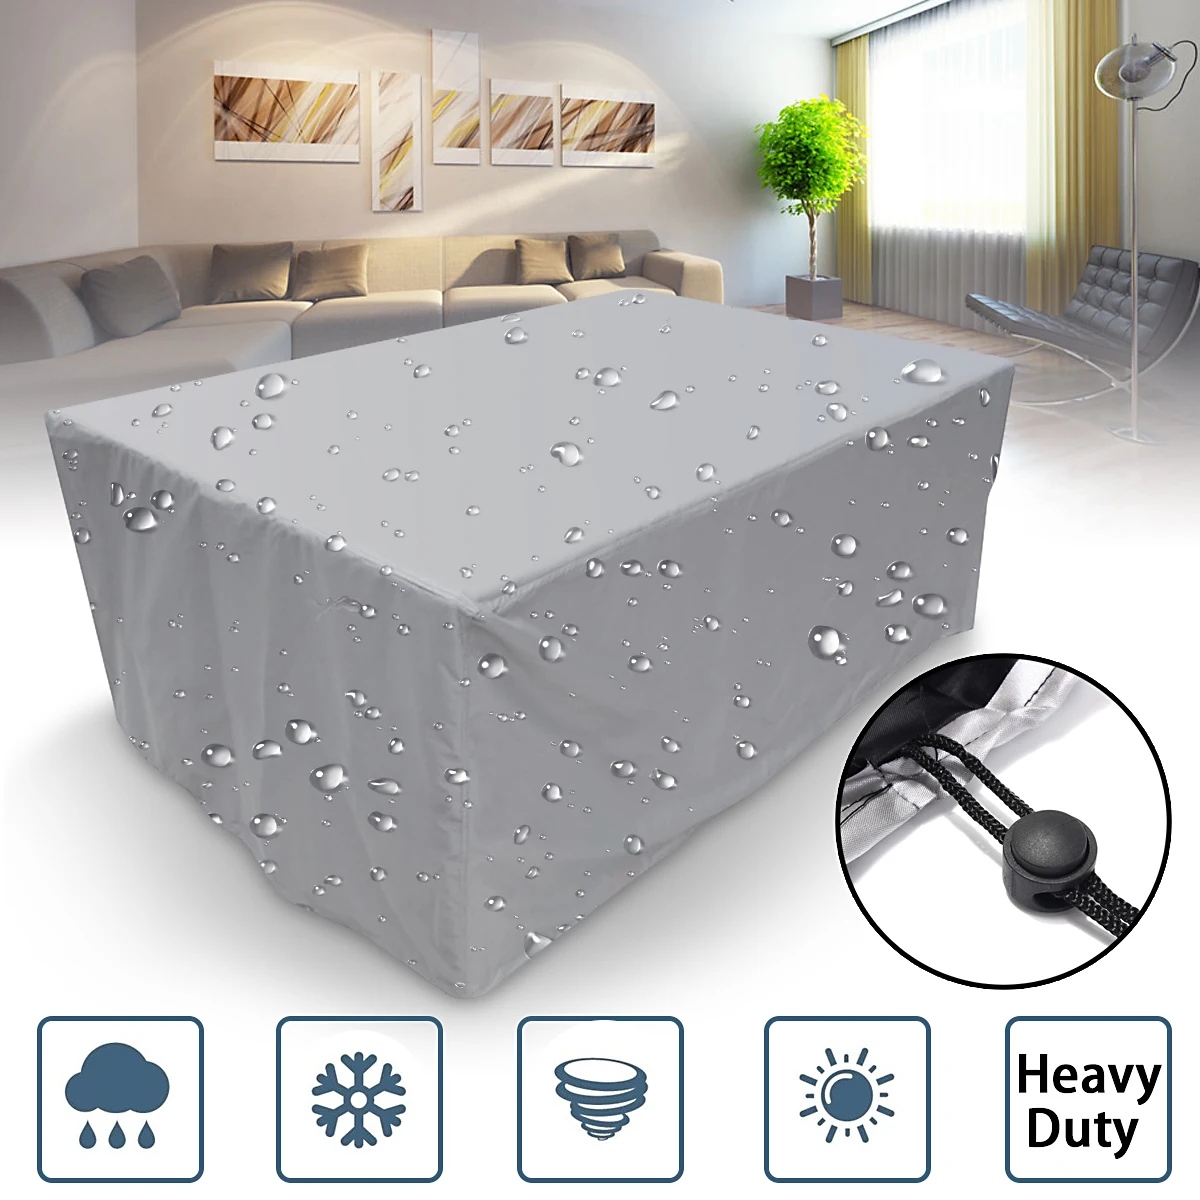 Details about   Outdoor Furniture Cover Waterproof Patio Furniture Protector Garden Rain Cover 